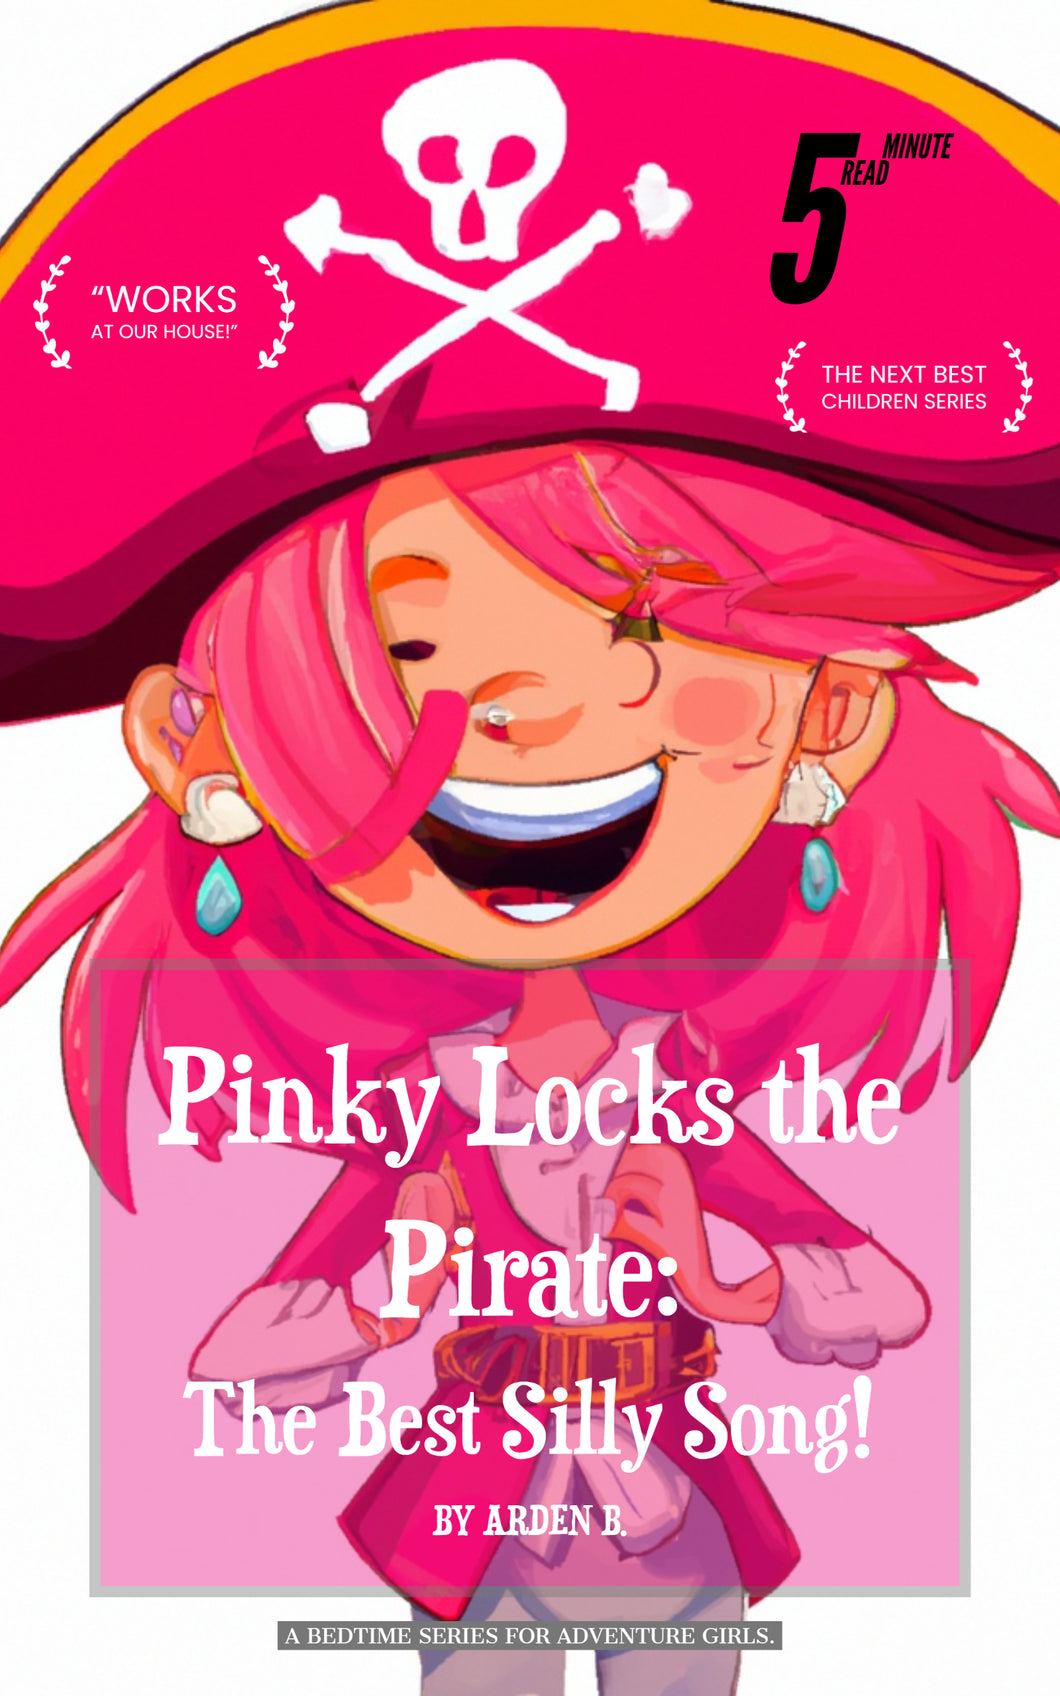 Pinky Locks the Pirate: The Best Silly Song!